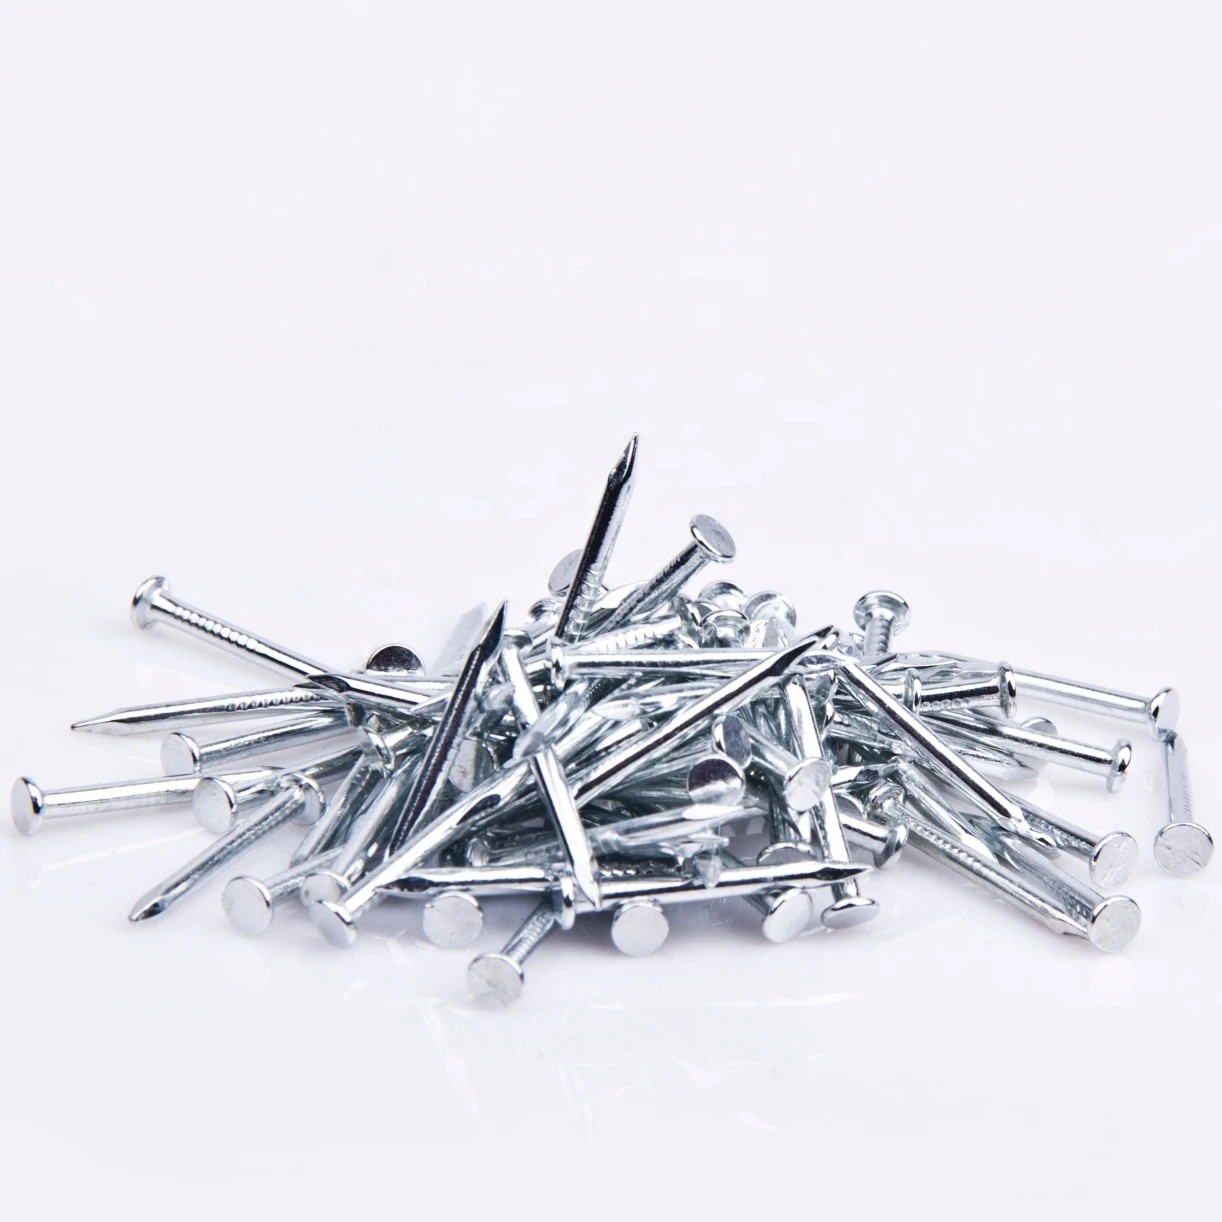 Professional factory supply all size stainless hardened steel concrete nail 1/2 to 8